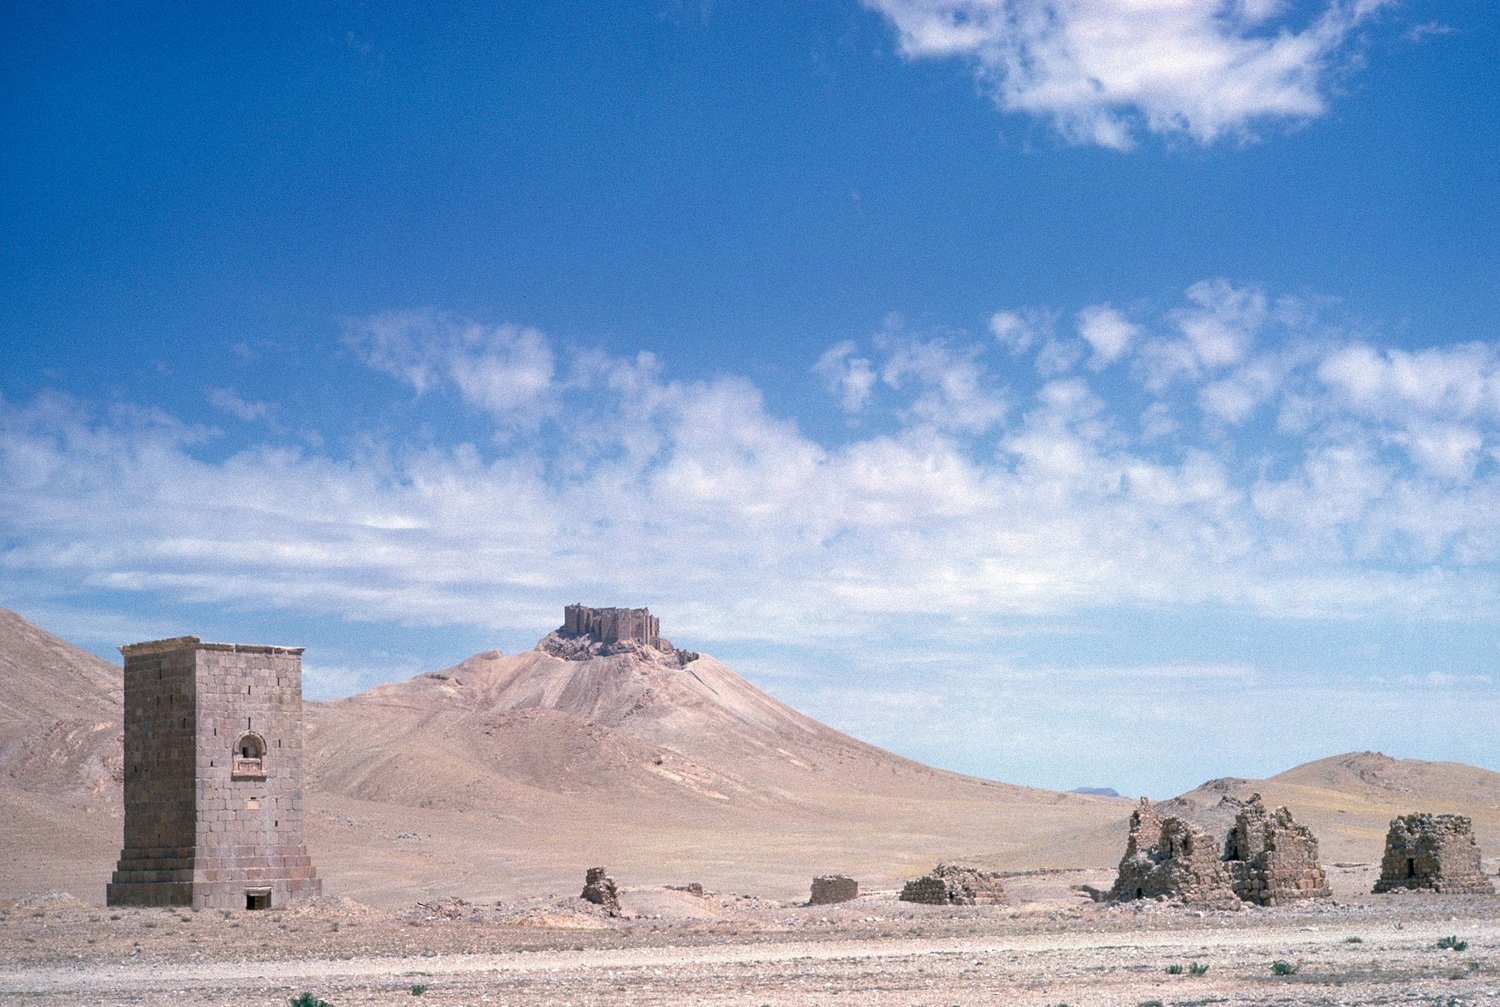 Tower tombs in the Valley of the Tombs, with the Qala in the distance. The Elahbel tomb at left was reported destroyed in August 2015.